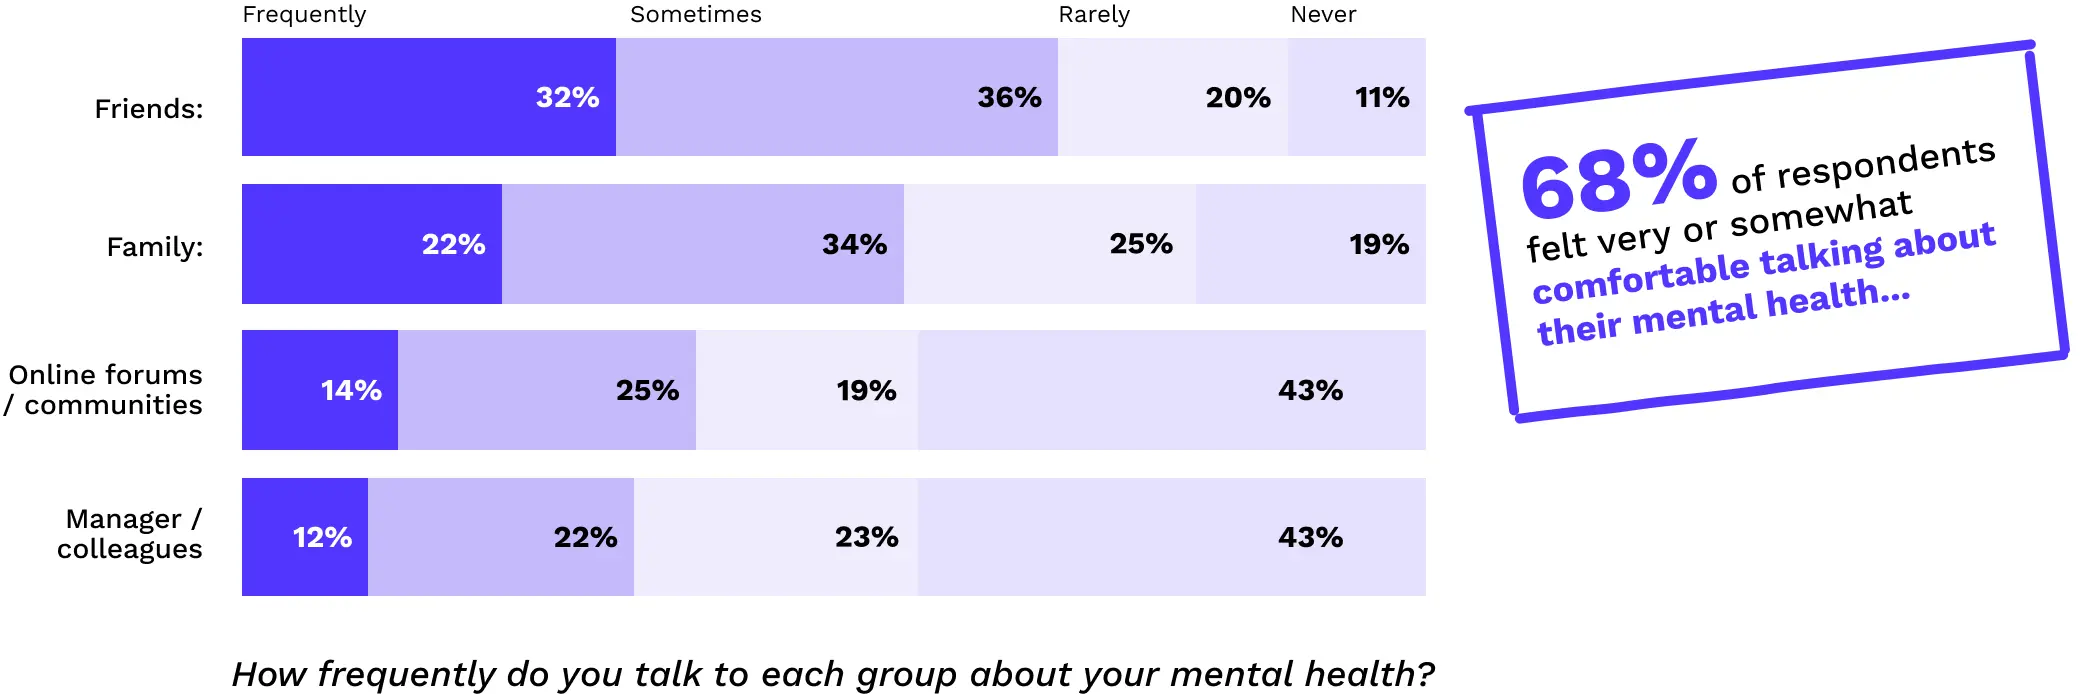 How frequently do you talk to each group about your mental health?